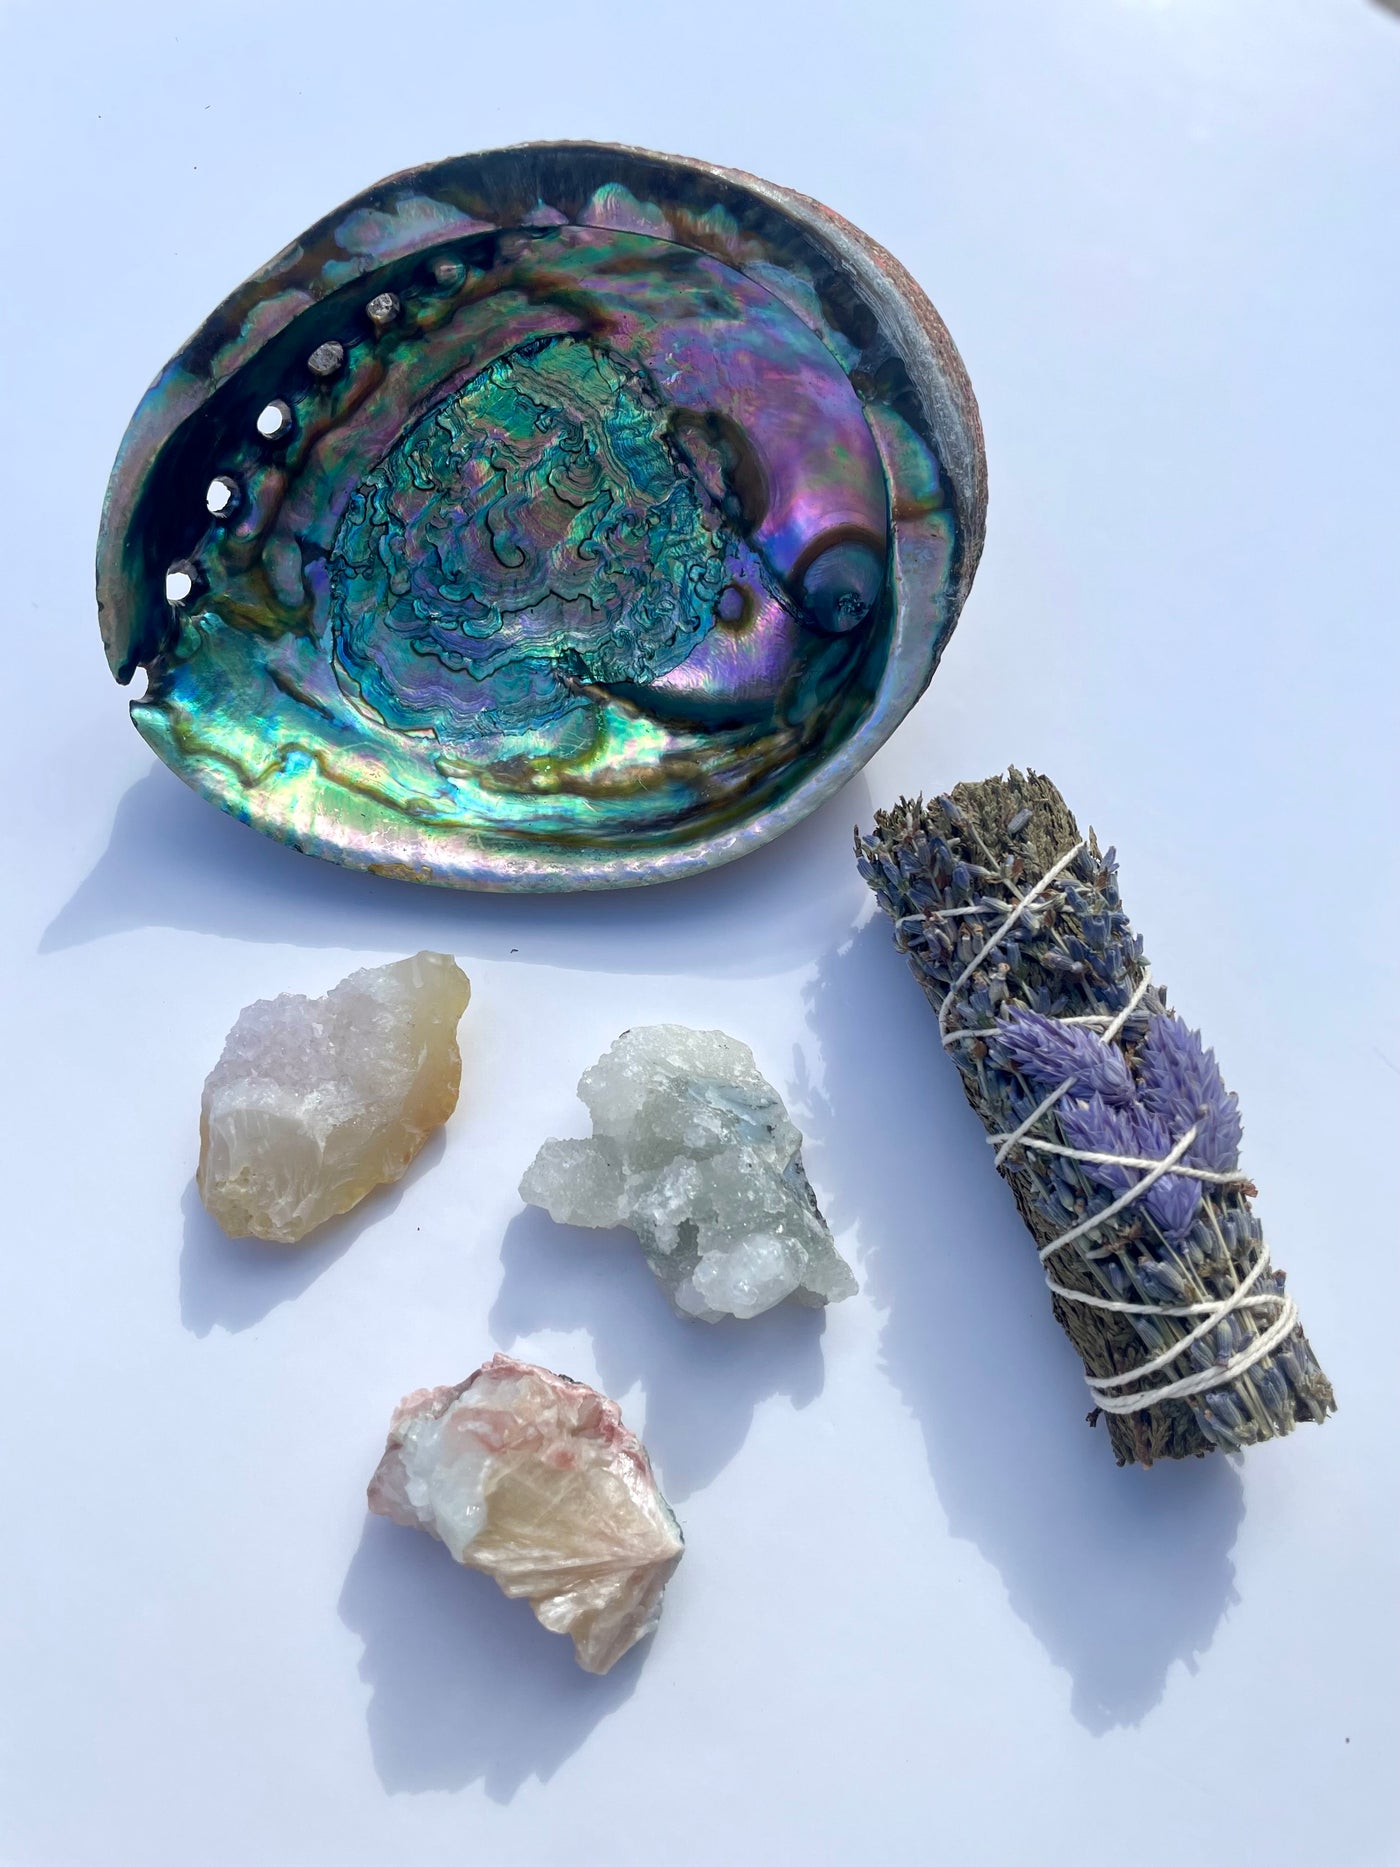 Clearing Set for Energy Balance - Abalone Shell, Juniper Smoke Bundle with Lavender, and Apophyllite Healing Stone